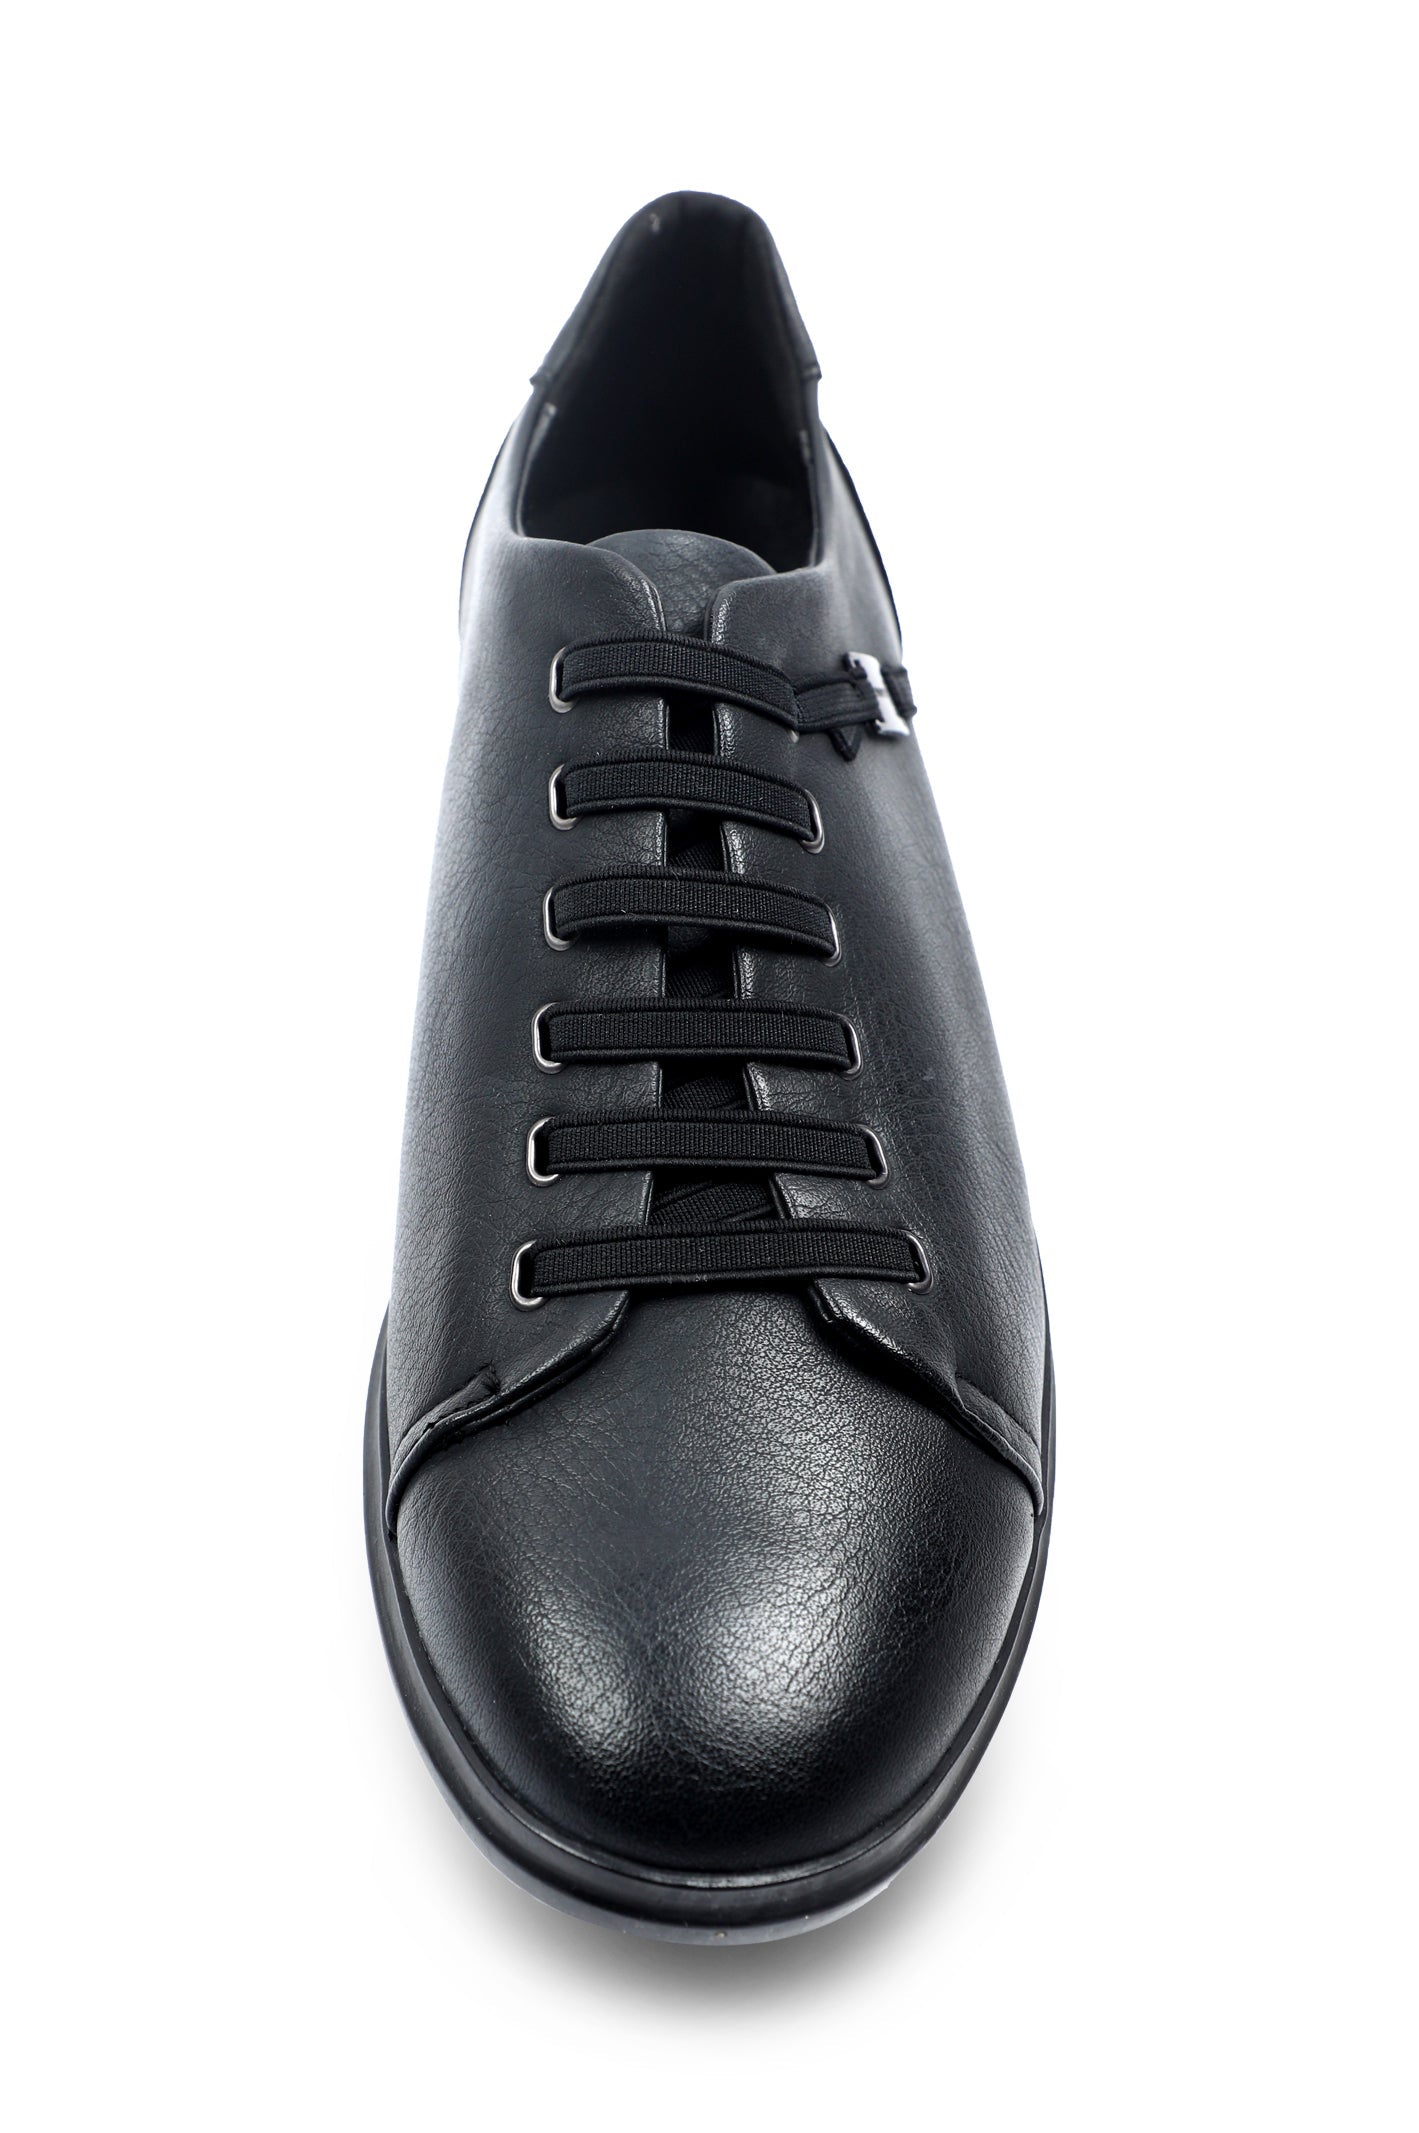 Casual Shoes For Men in Black SKU: SMJ0010-BLACK - Diners